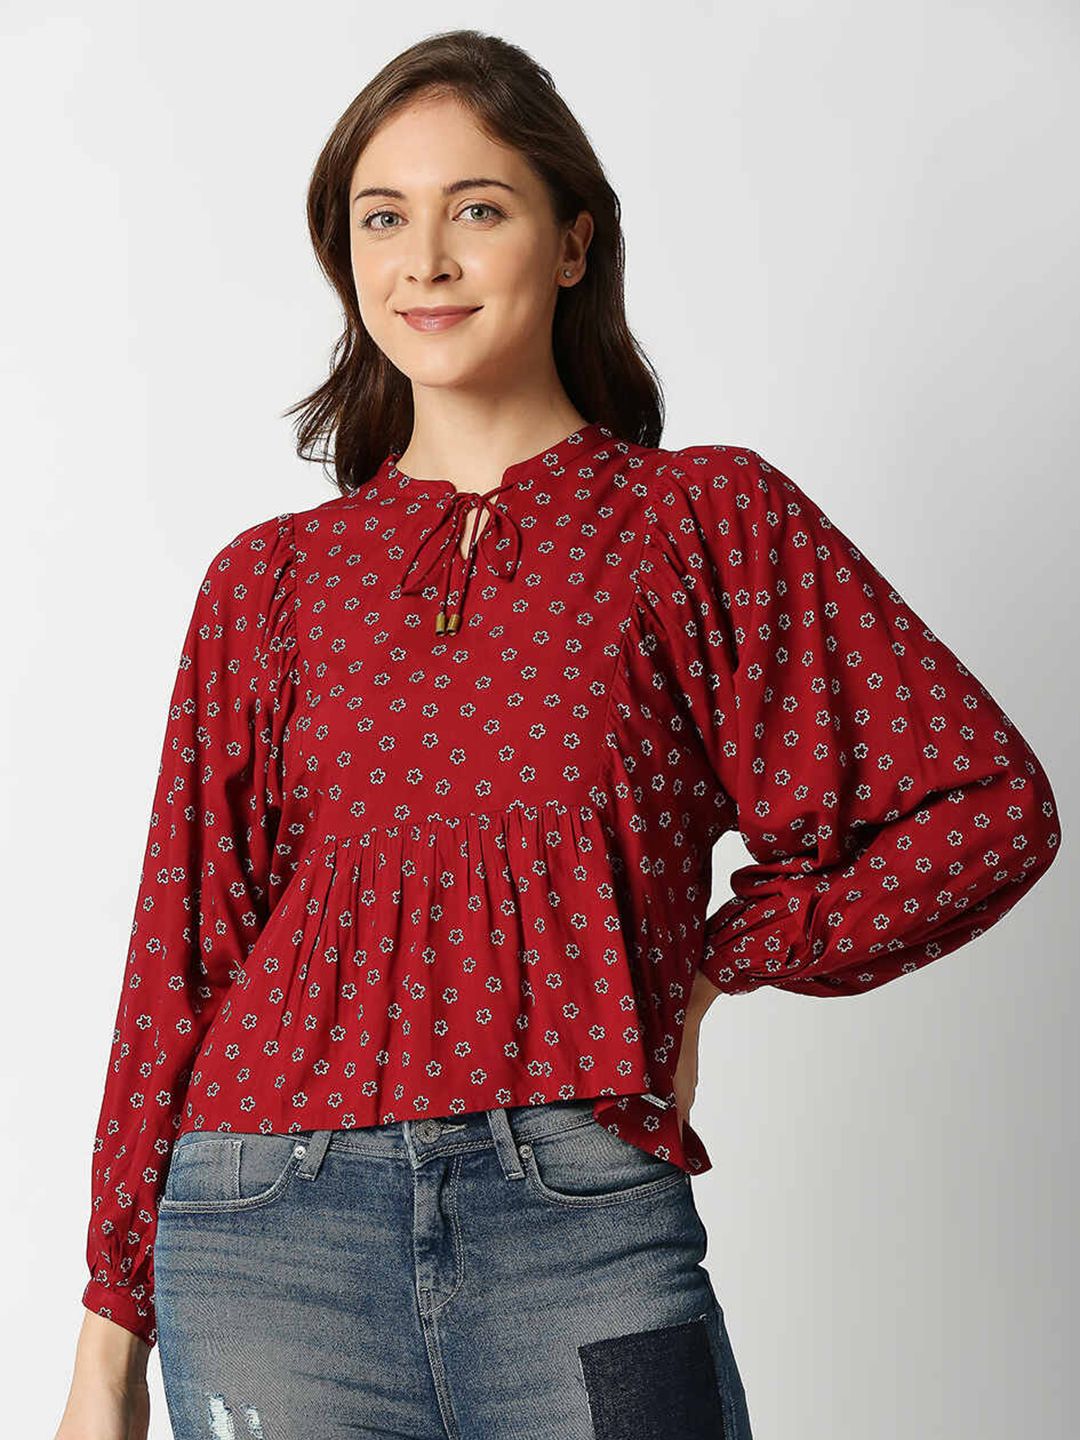 Pepe Jeans Red & White Print Mandarin Collar Empire Top Price in India